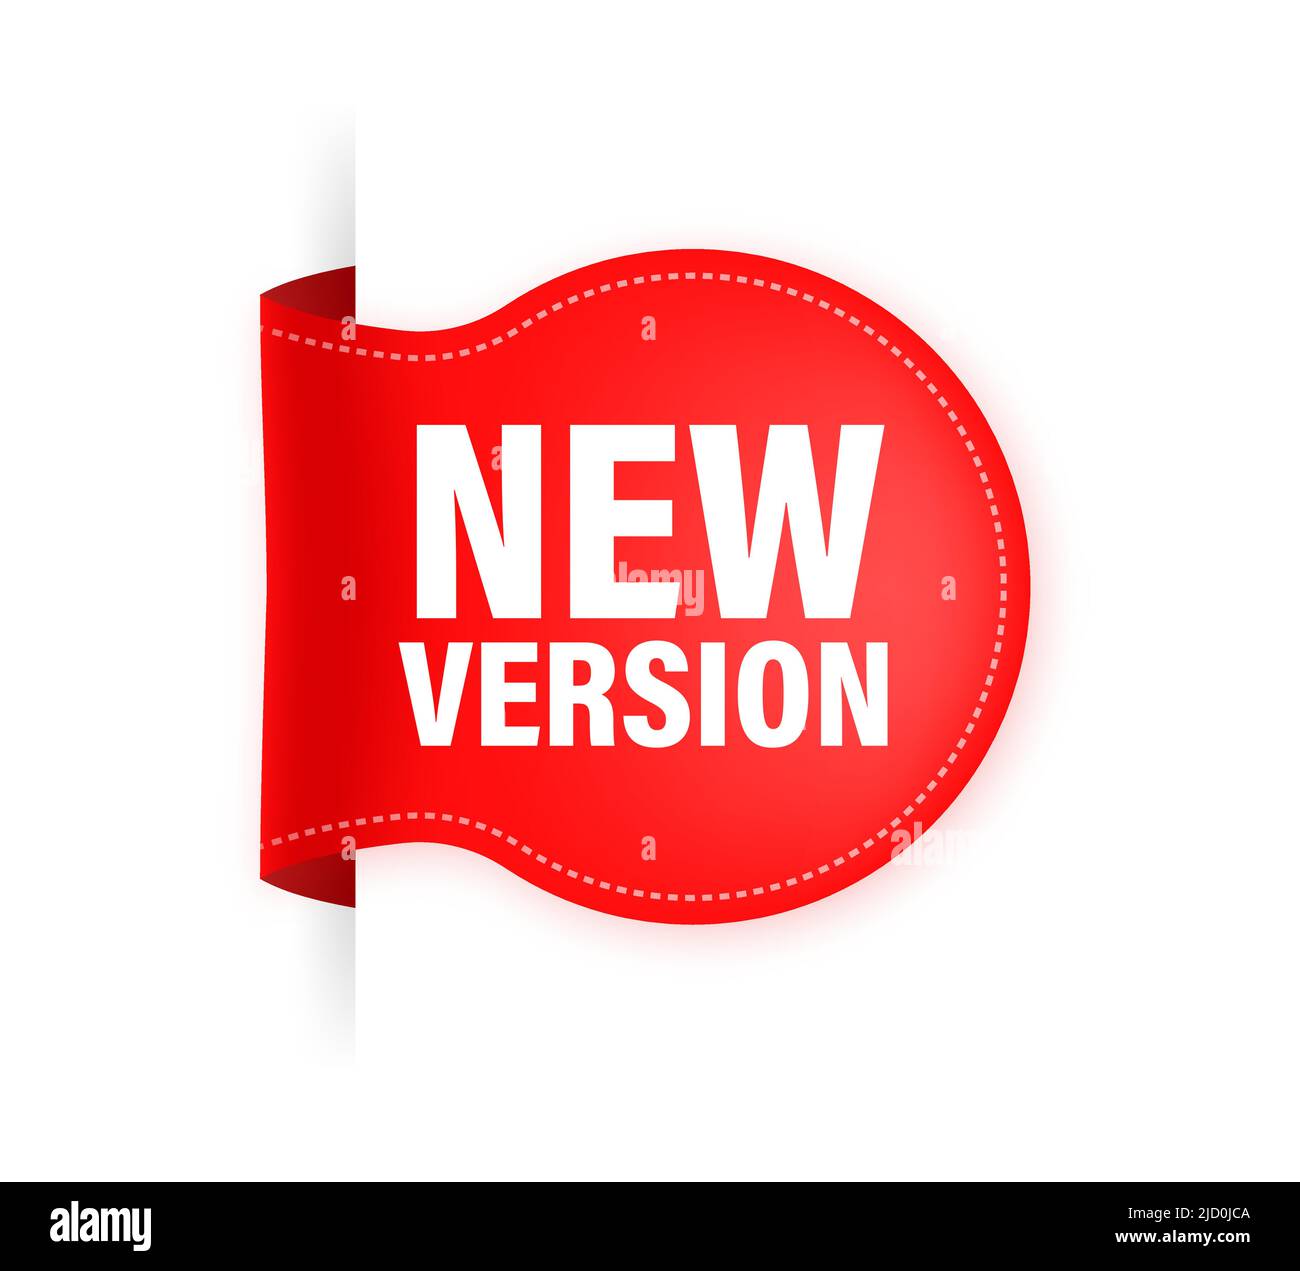 New version red label on white background. Red banner. Vector illustration. Stock Vector